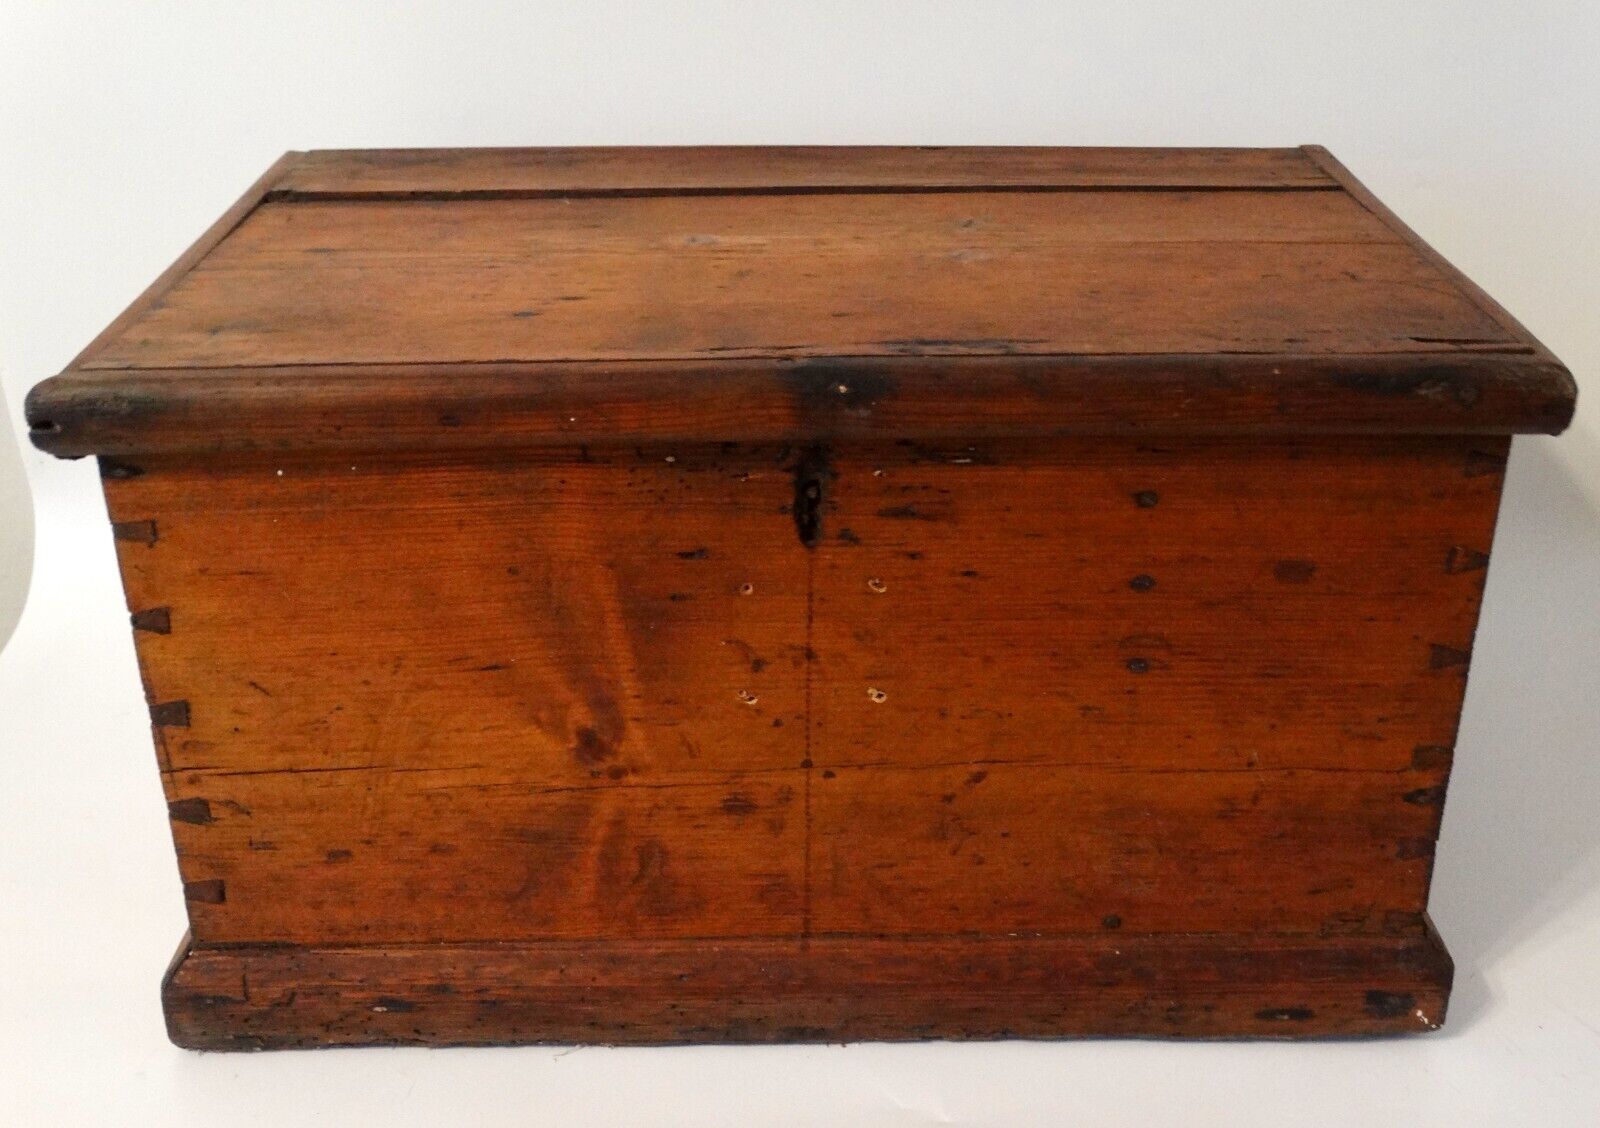 Antique English Handcrafted Solid Pine Dovetail Box Rustic Handles